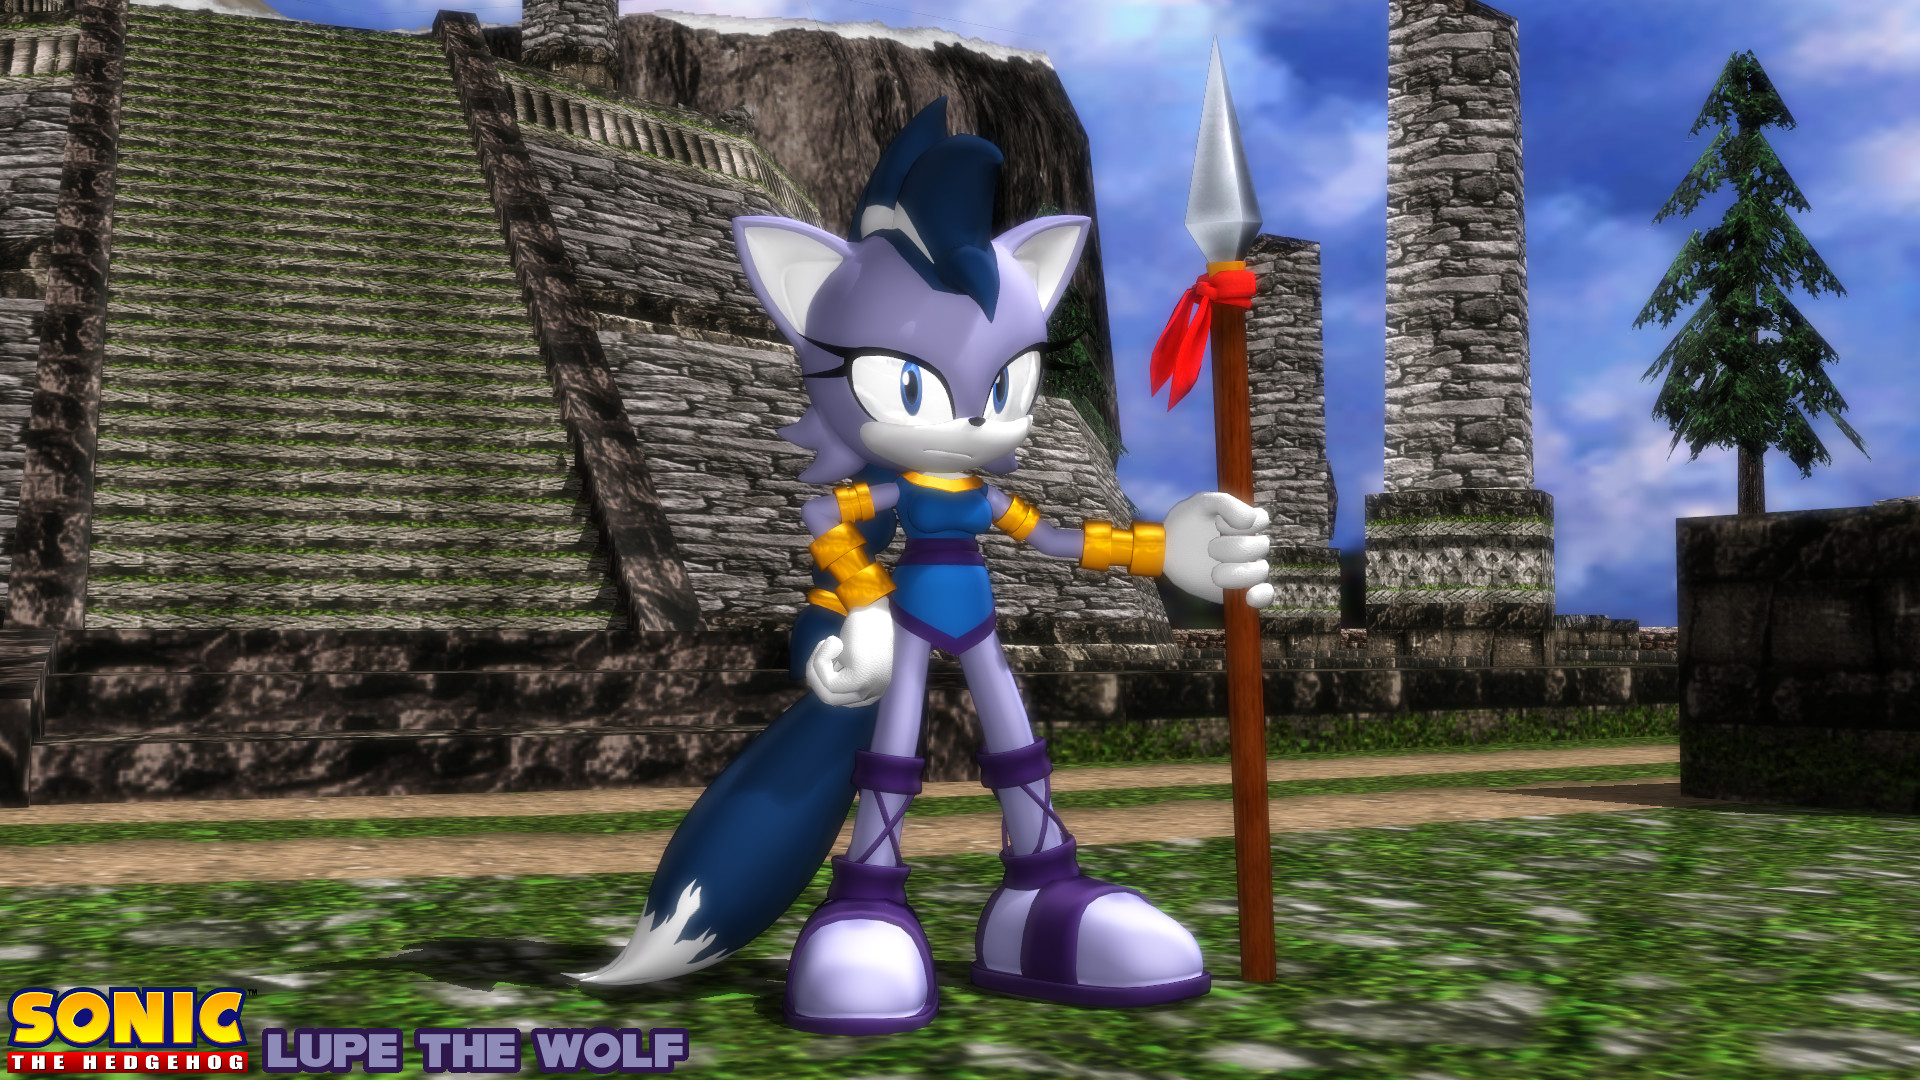 Custom / Edited - Sonic the Hedgehog Media Customs - Lupe & The Wolf Pack -  The Spriters Resource